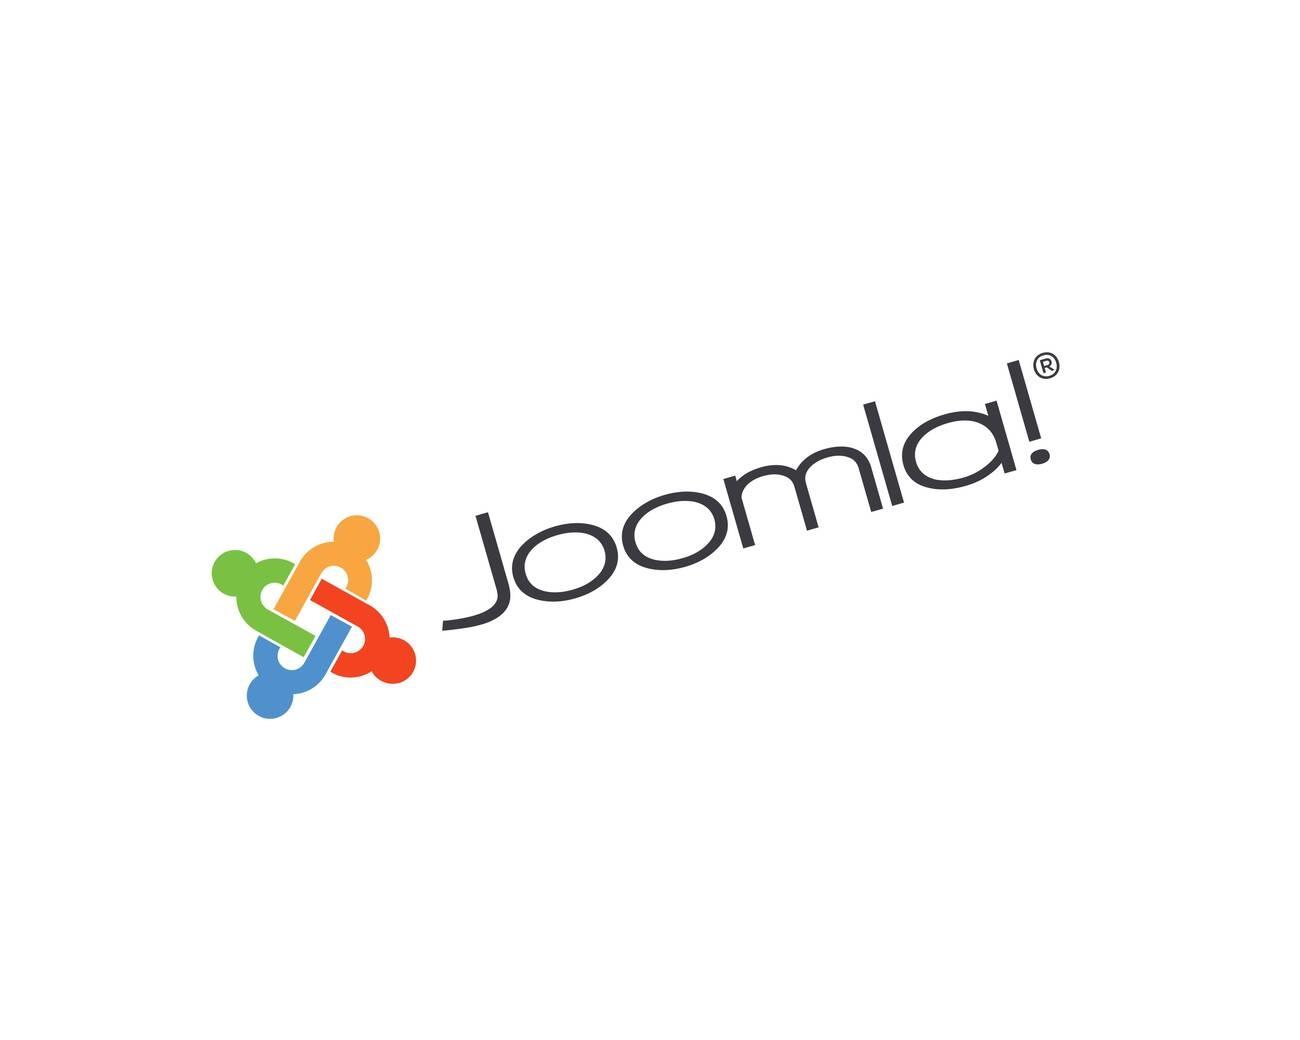 Getting The Broader Perspective Of The New Joomla Version